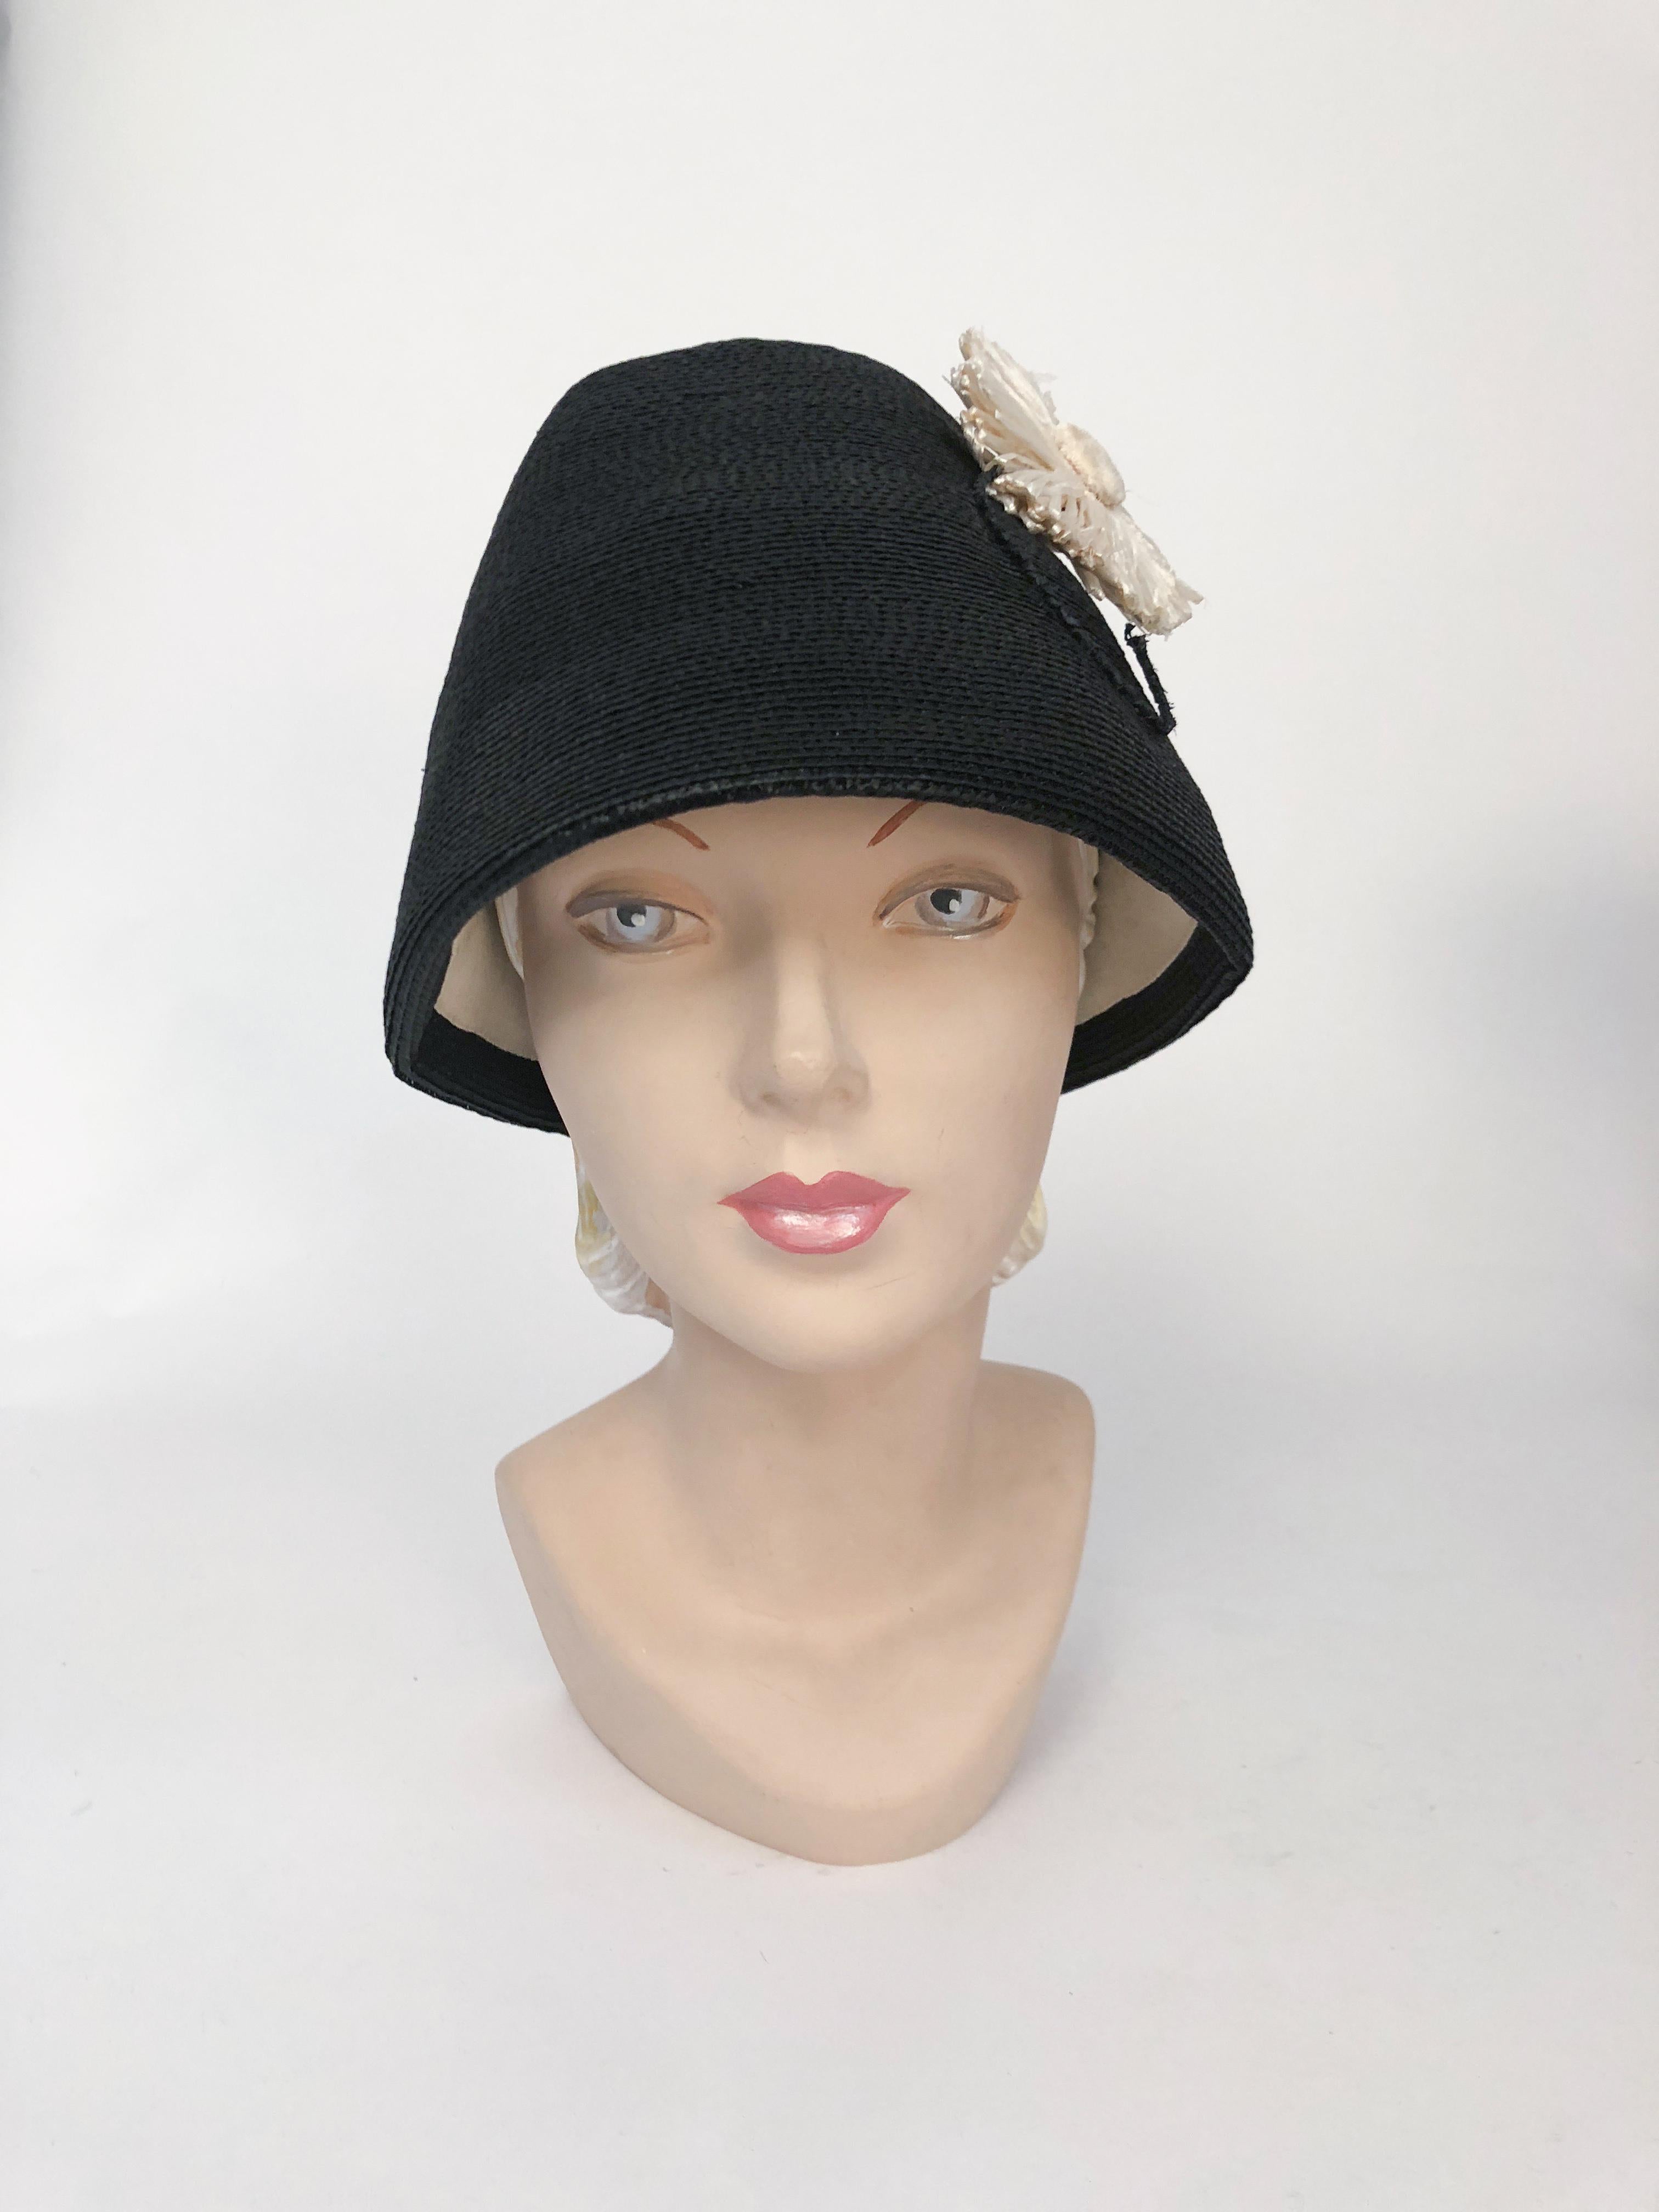 1960s Black Woven Straw Cloche Hat with Decorative Whimsical Daisy accent that is reversible to have multiple positions